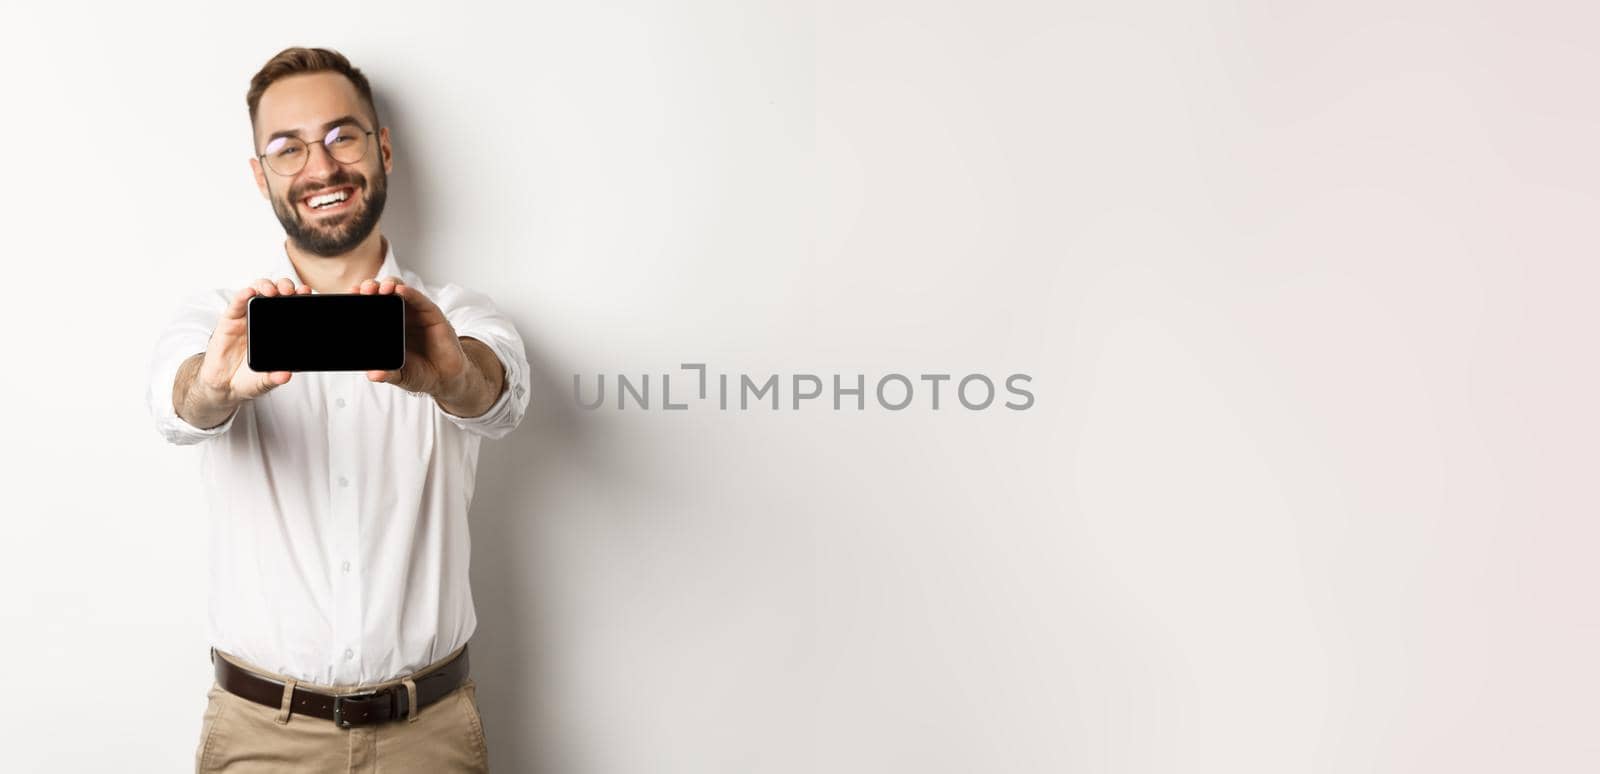 Happy business man showing mobile screen, holding phone horizontally, standing satisfied against white background.